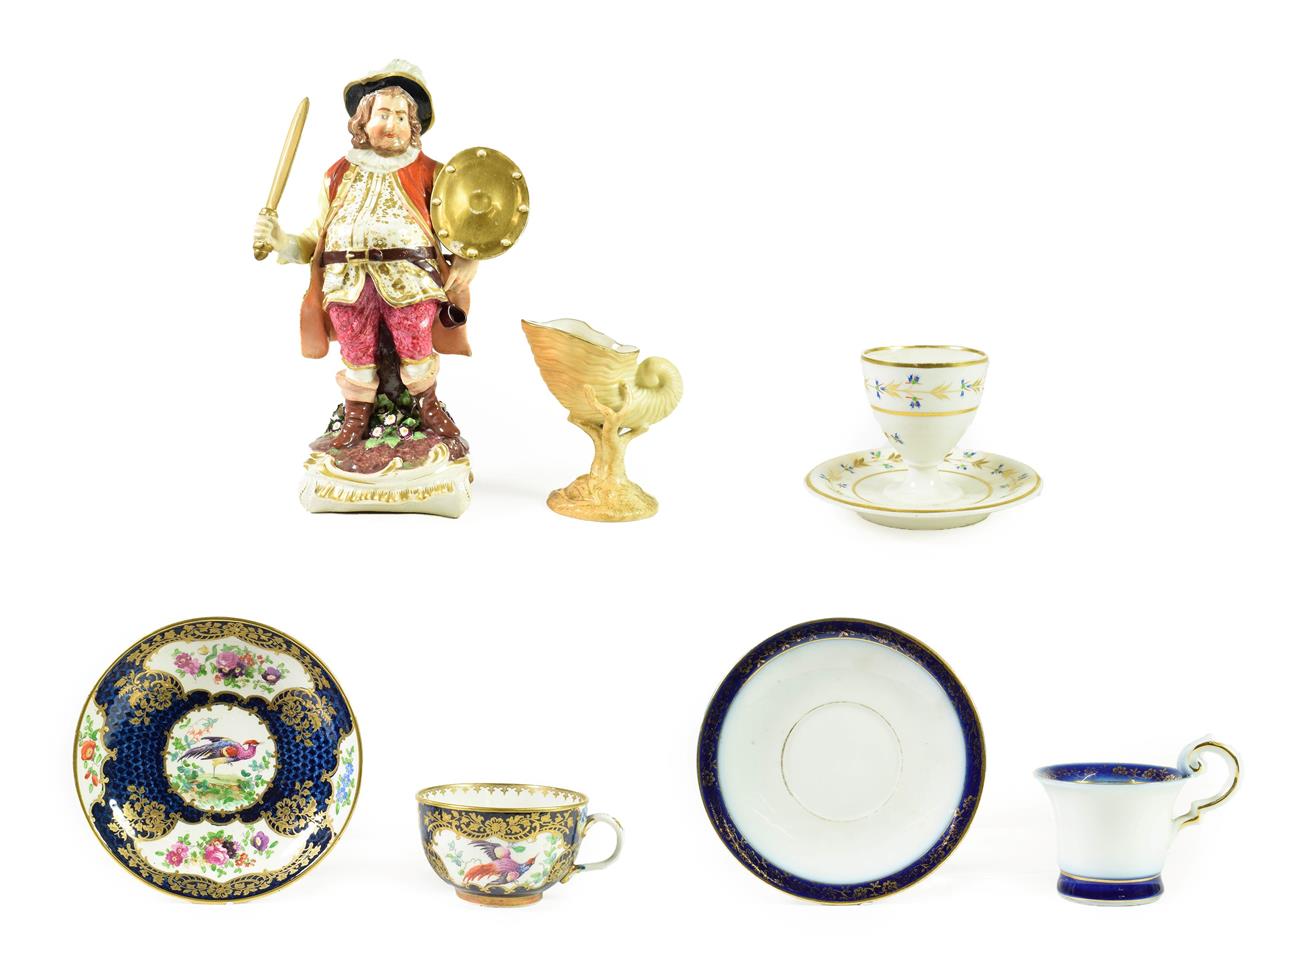 Lot 52 - A Derby Porcelain Figure of  Falstaff, circa 1780, standing, a sword in one hand, his shield in the